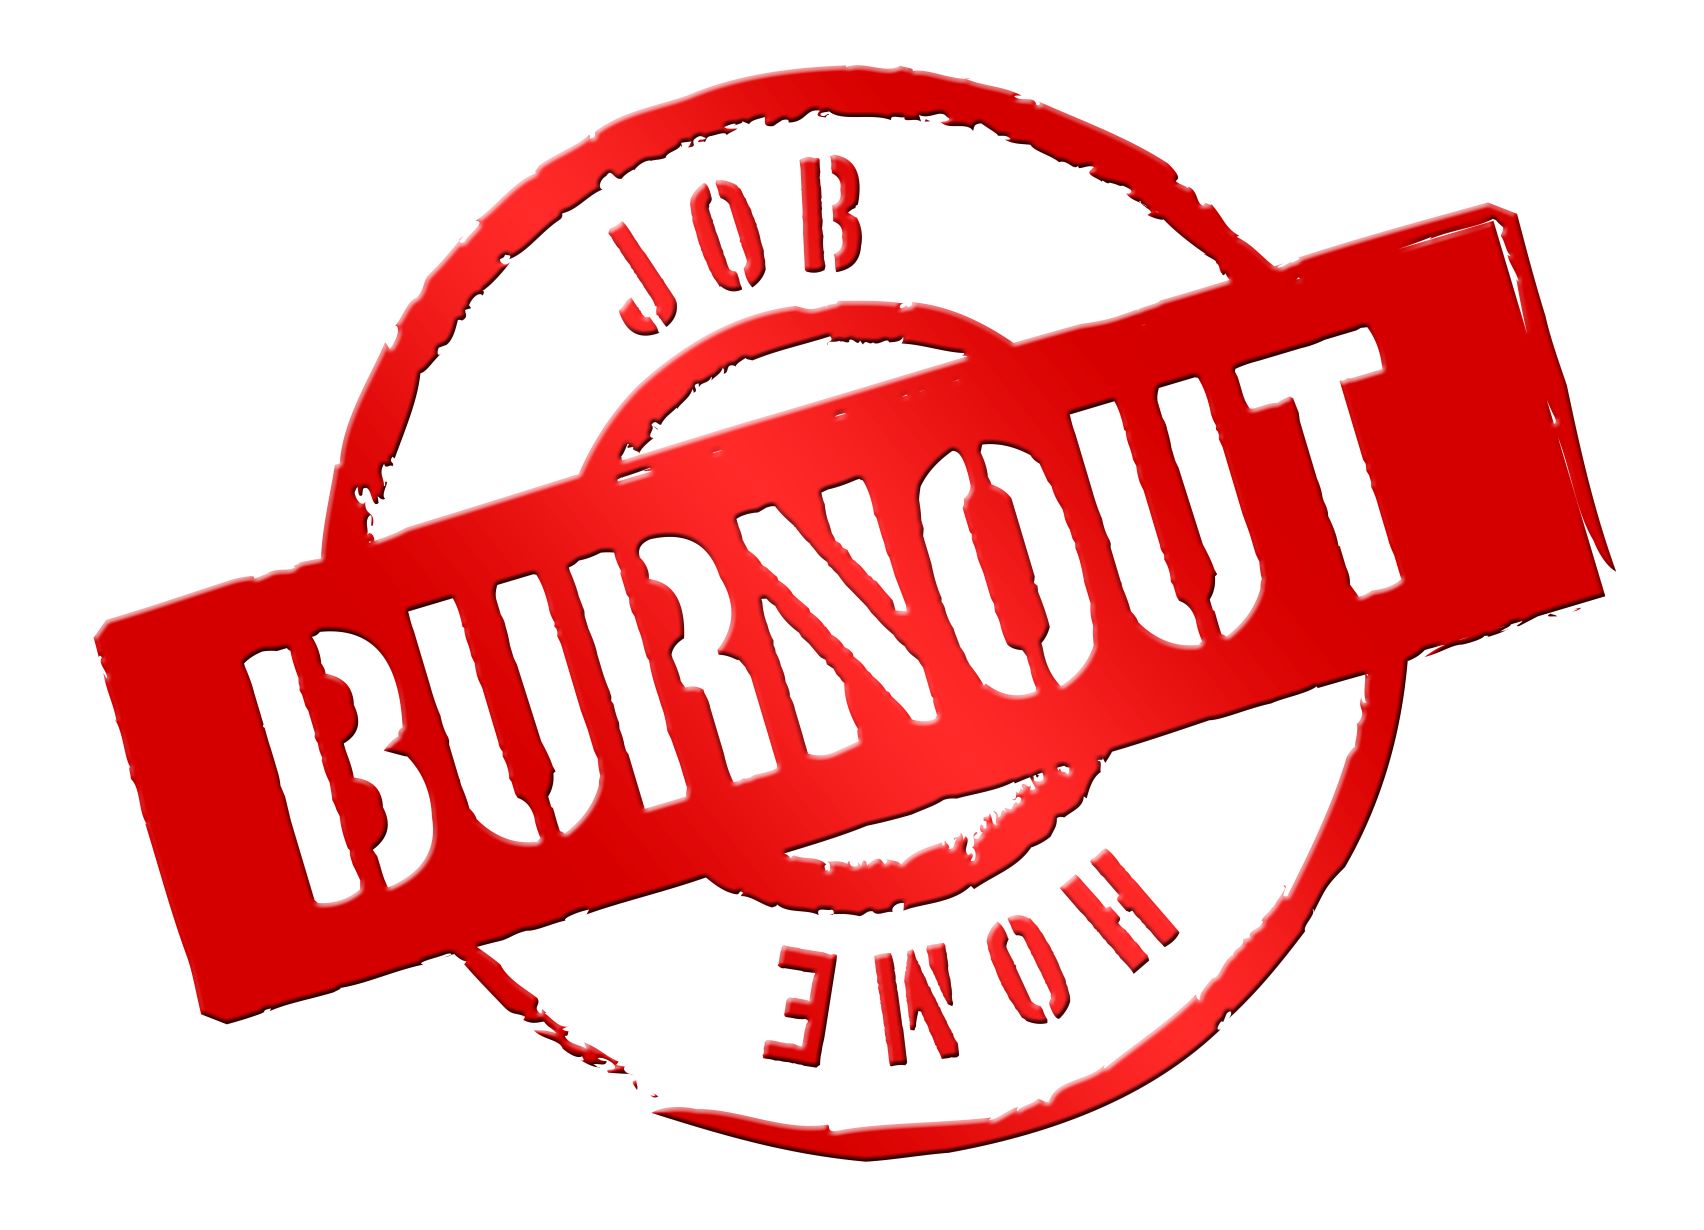 Preventing Burnout: 3 Keys to Use